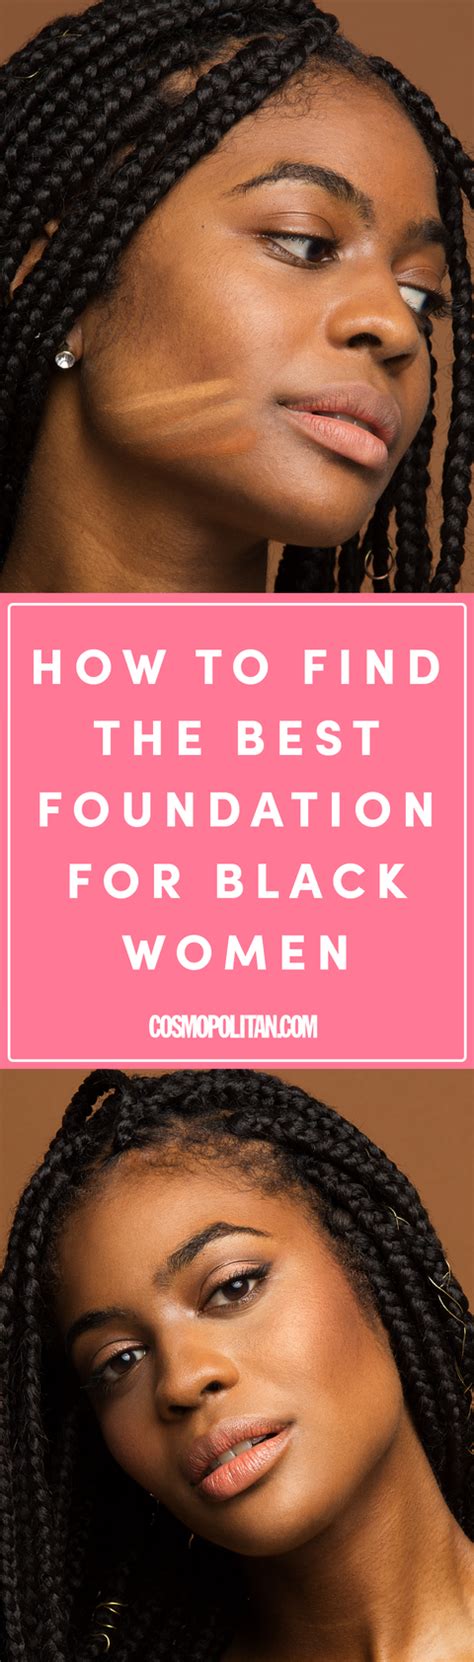 6 Women Of Color Share Their Journey To Finding The Right Foundation